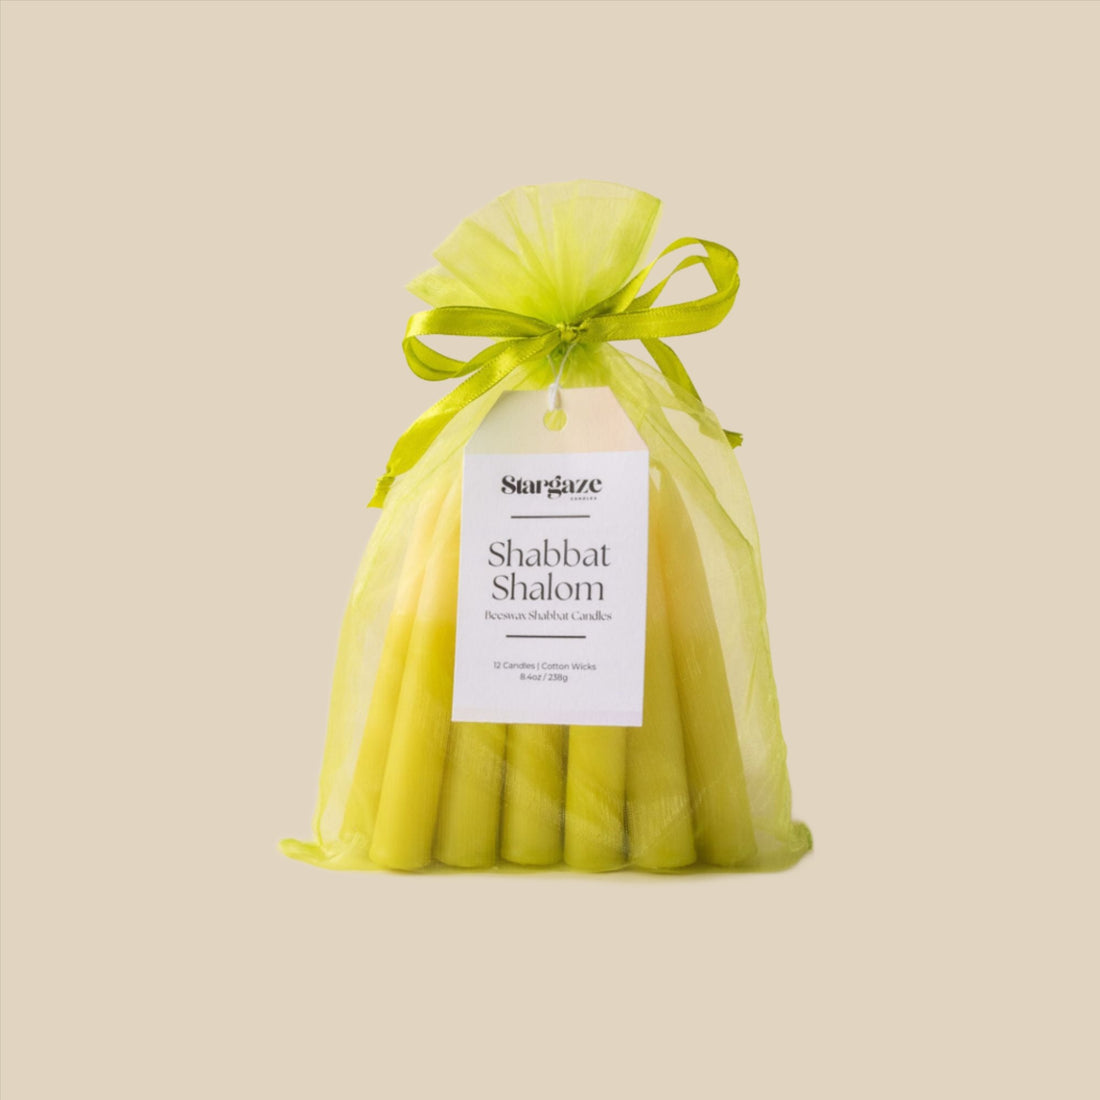 Lime Green and White Beeswax Shabbat Candles